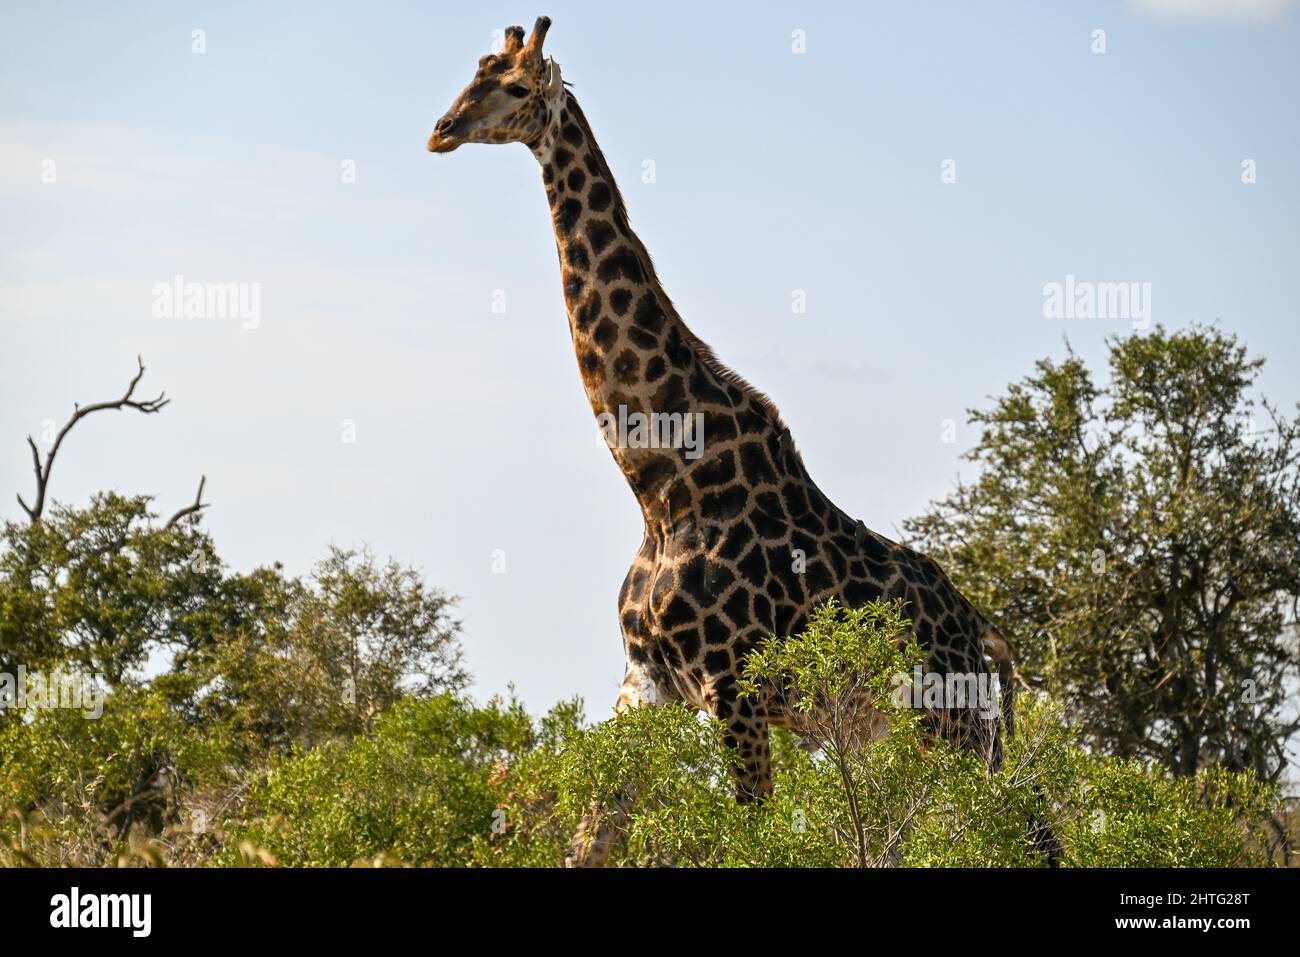 Giraffe standing our above trees Stock Photo